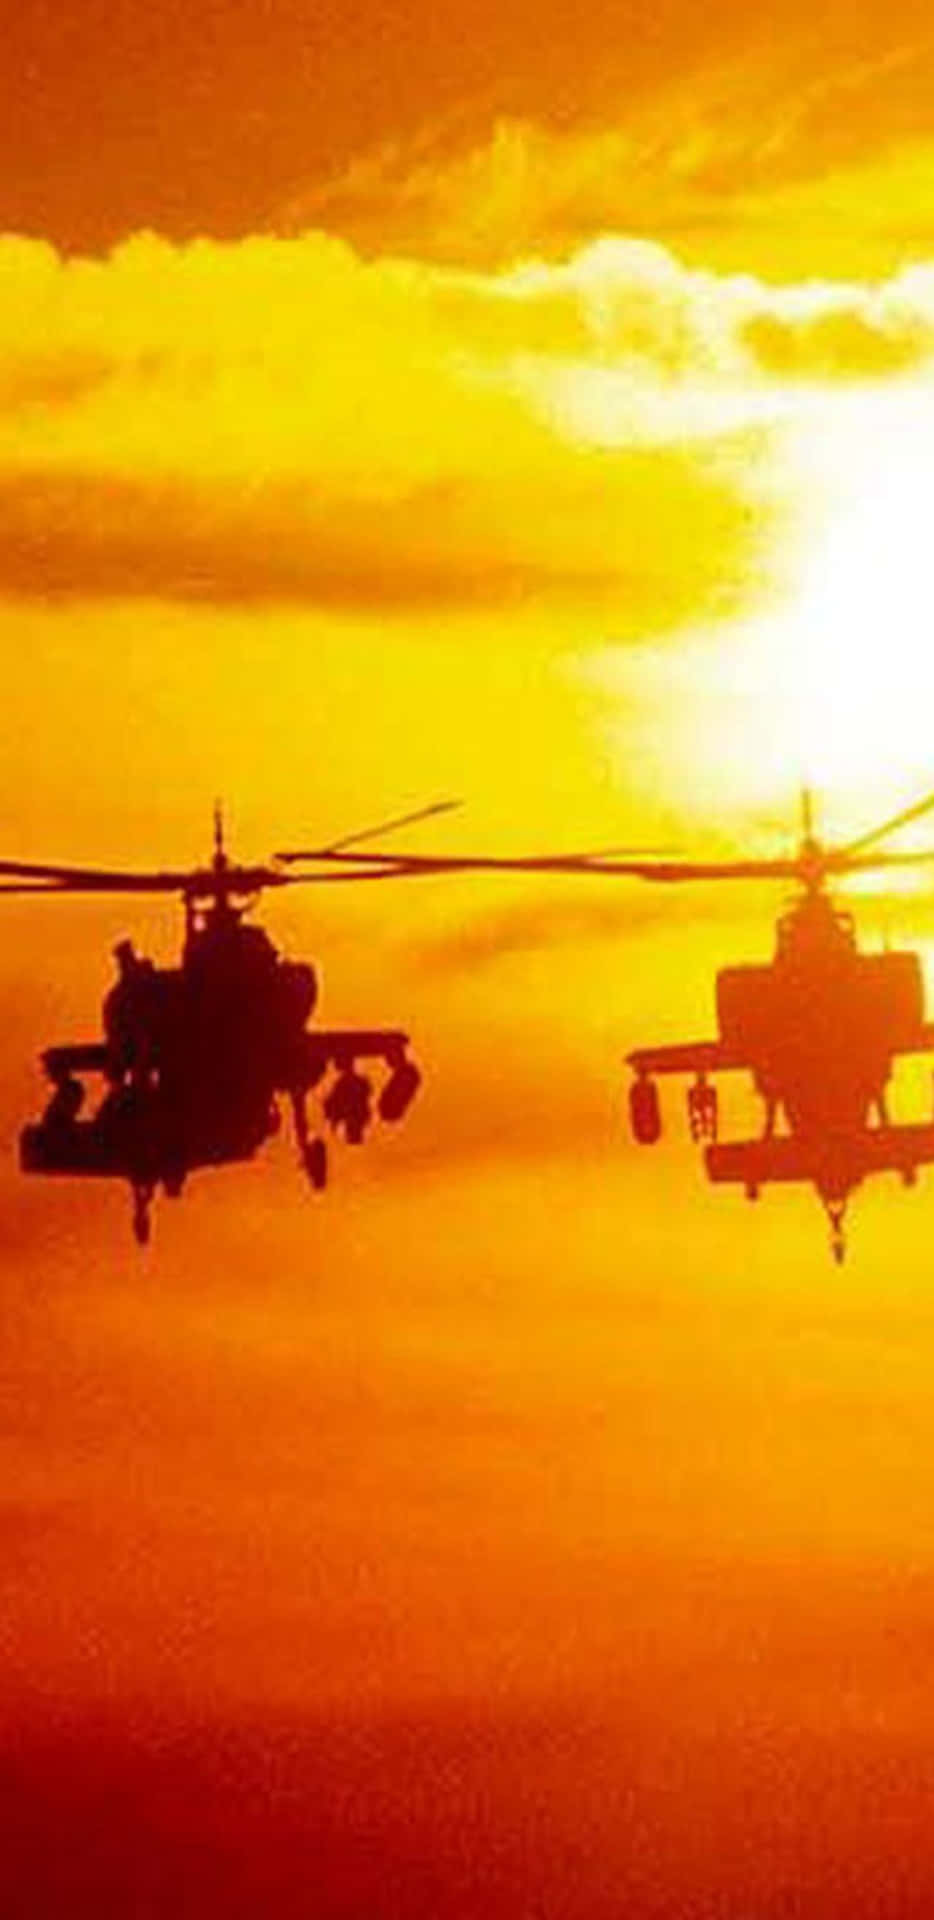 Pixel 3xl Helicopters Background Two Boeing AH-64 Apache Sunset